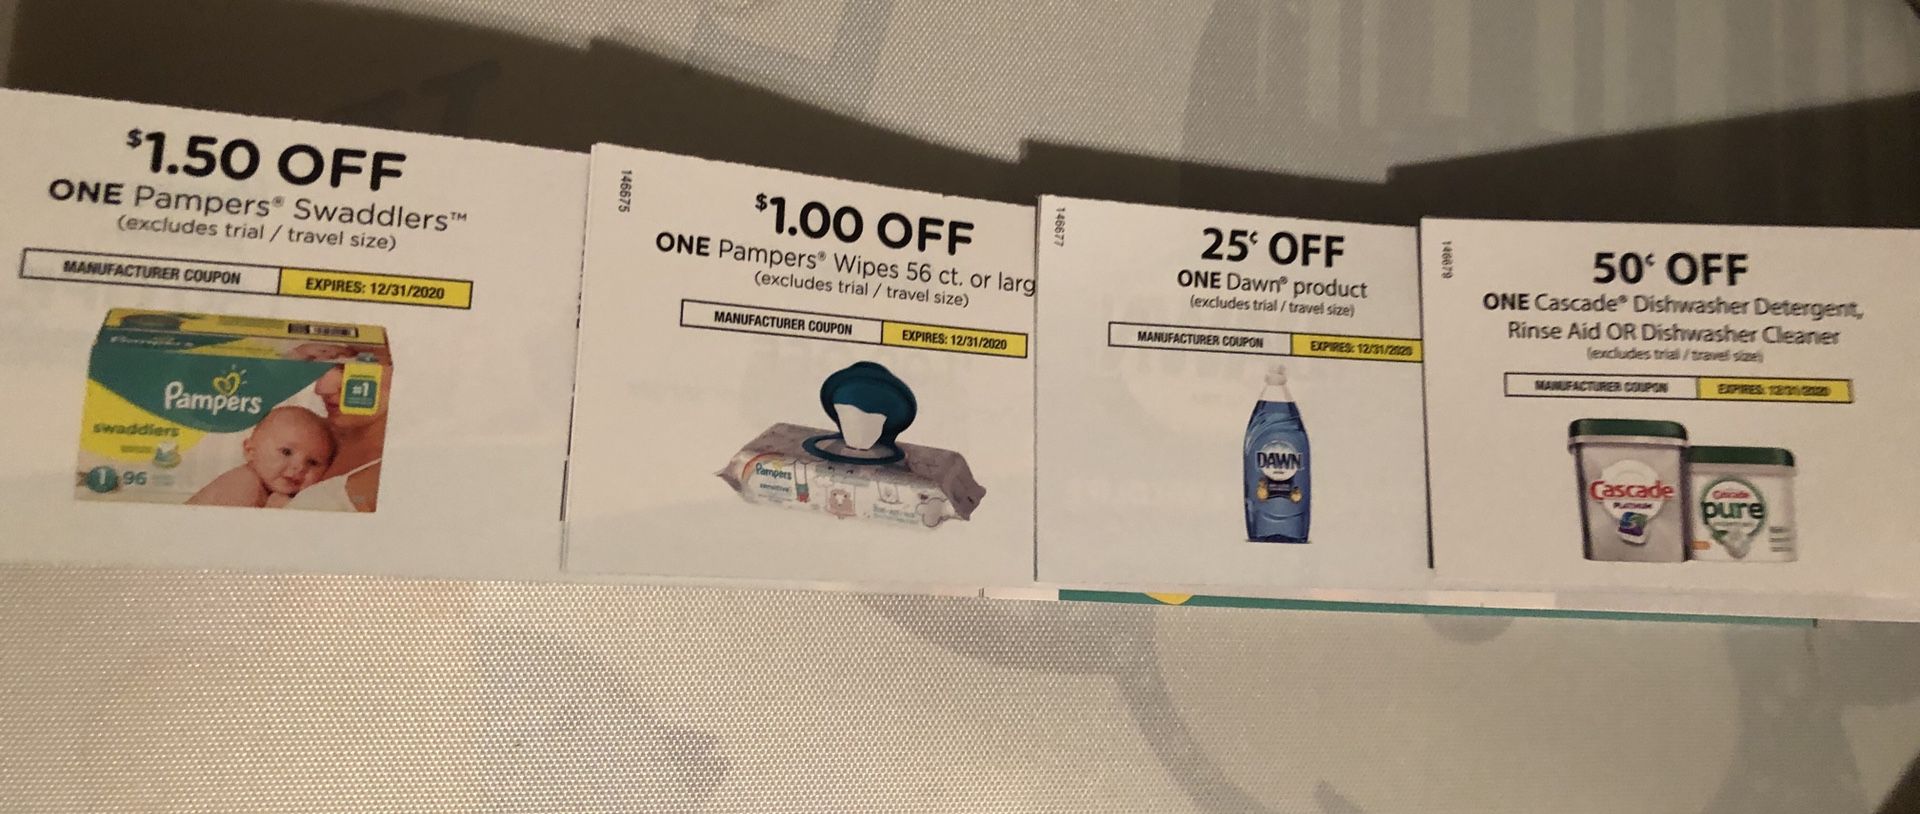 Coupon booklet (12/31/2020) x6